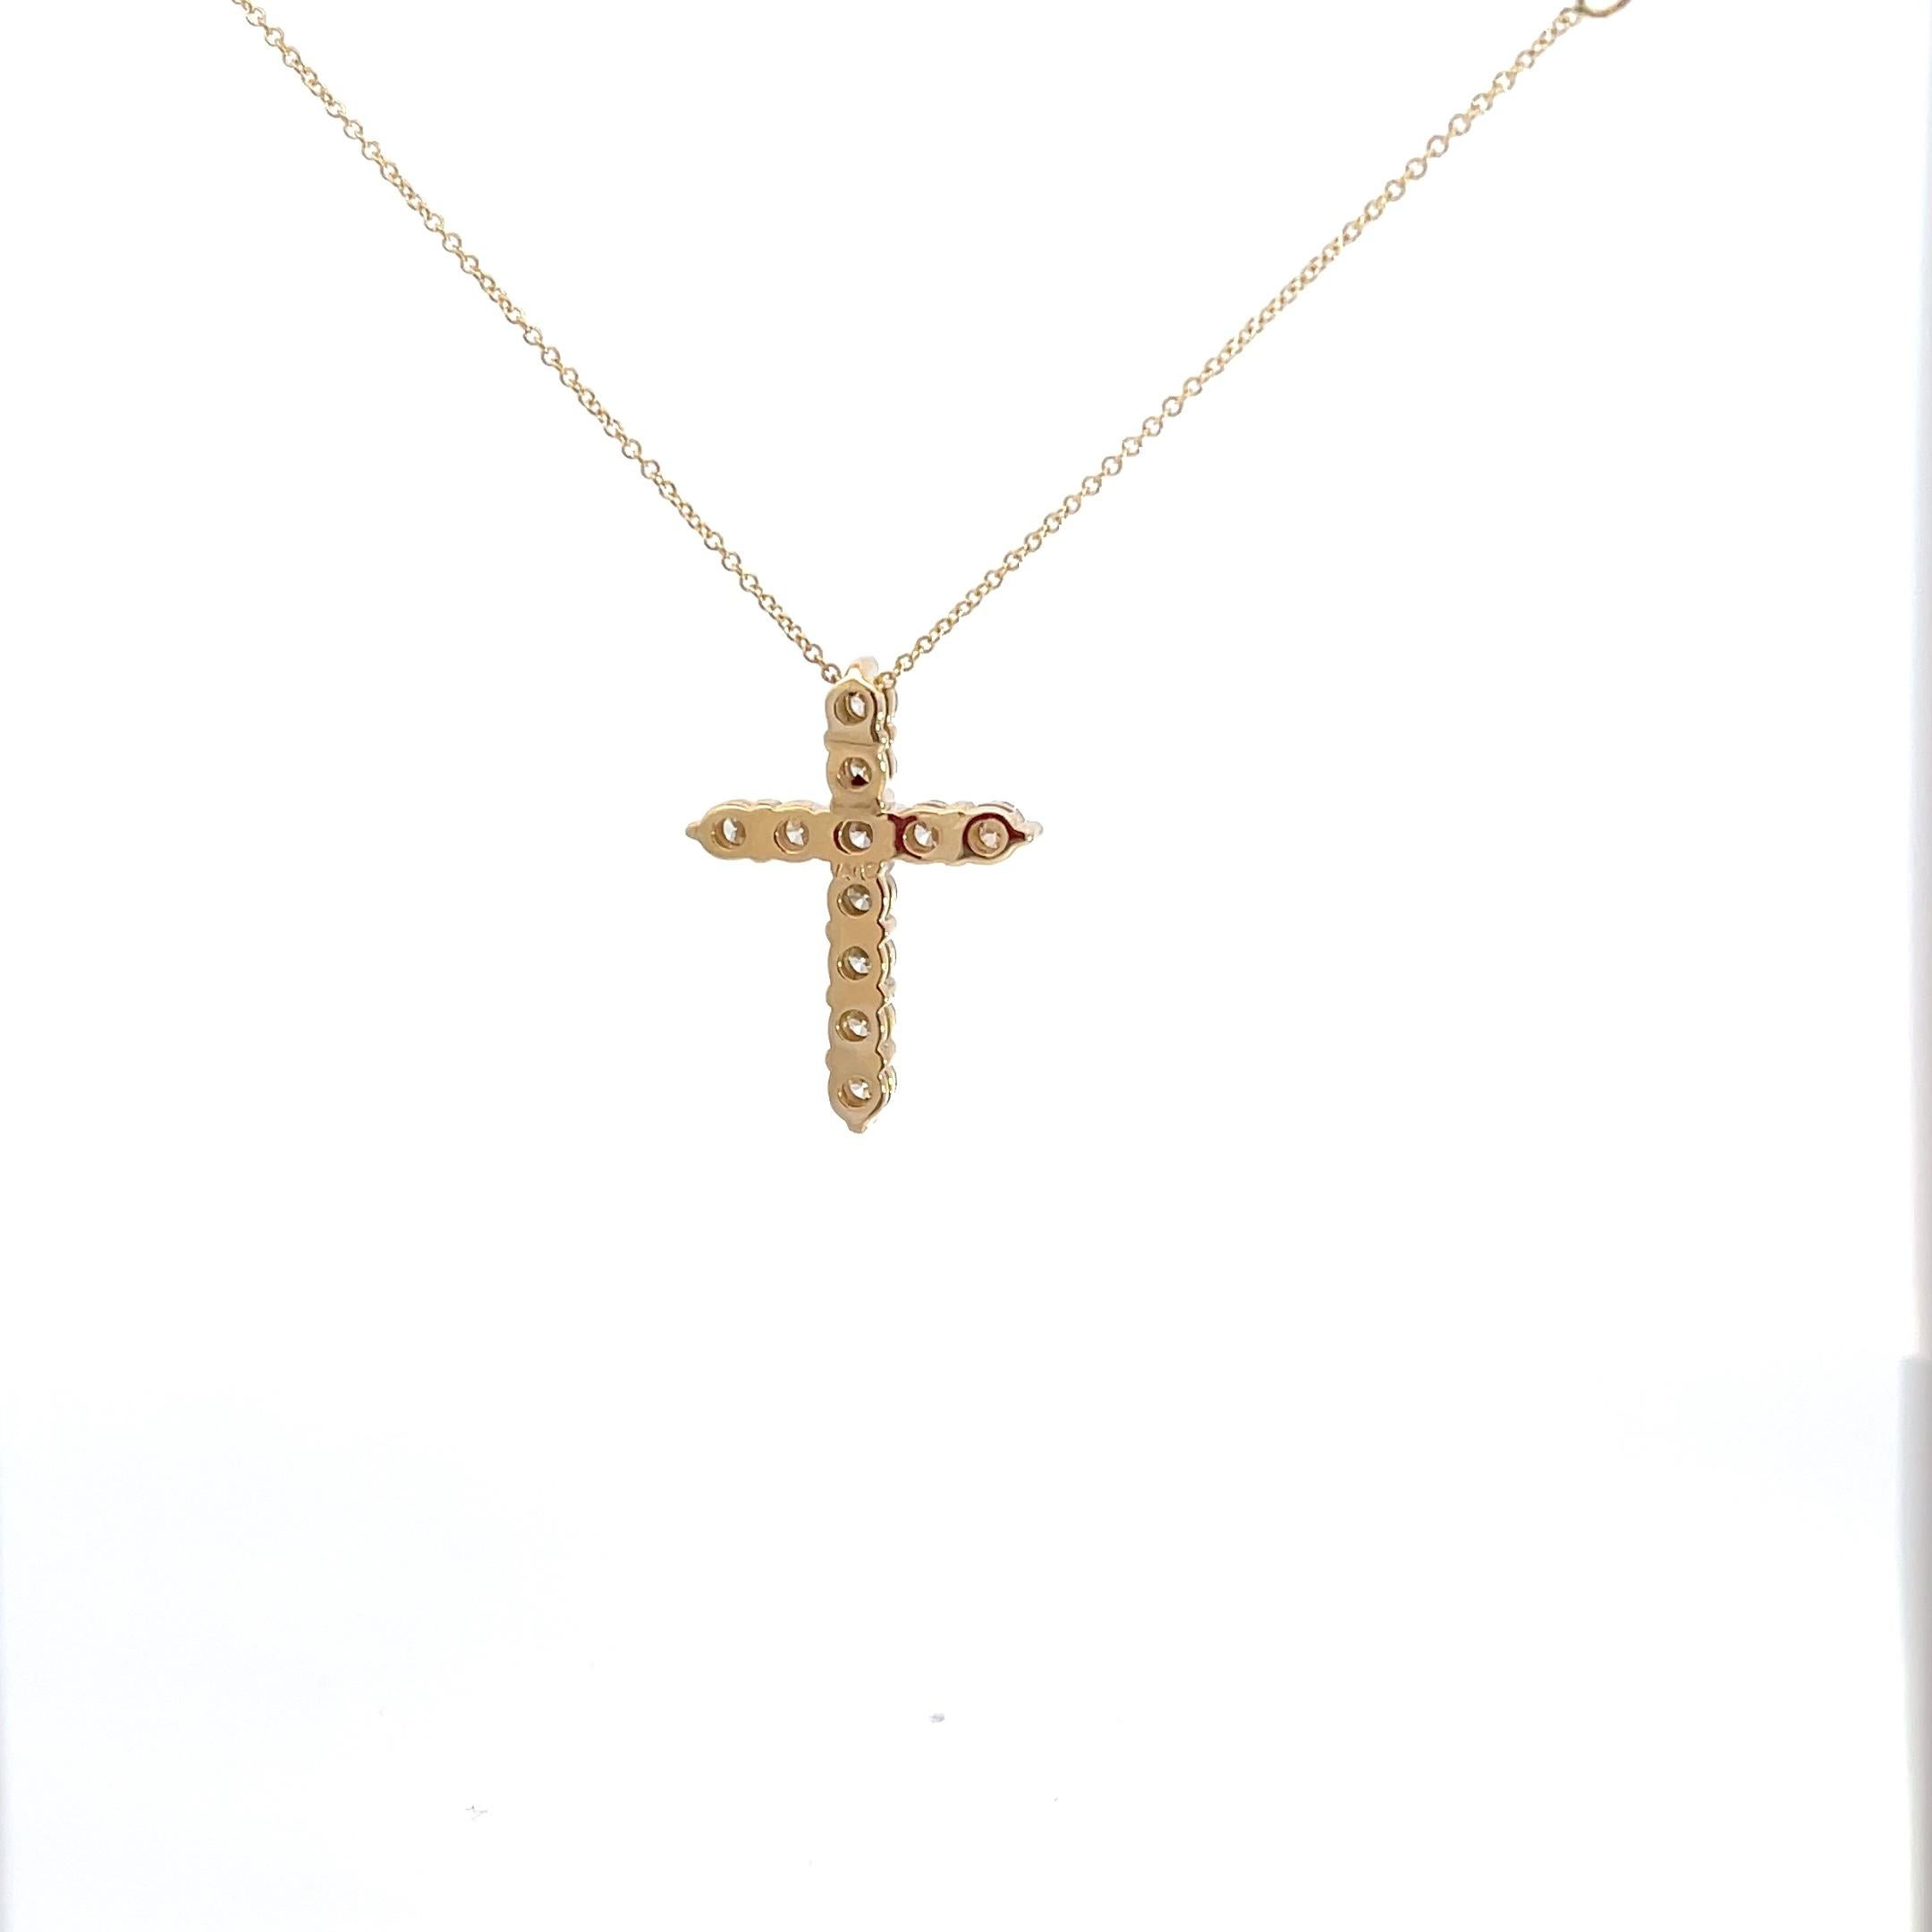 Introducing an exquisite symbol of faith and elegance, behold the mesmerizing 14K Yellow Gold 1.50 carat Diamond Cross Pendant. Crafted with meticulous attention to detail, this stunning piece showcases the timeless allure of a classic cross design.